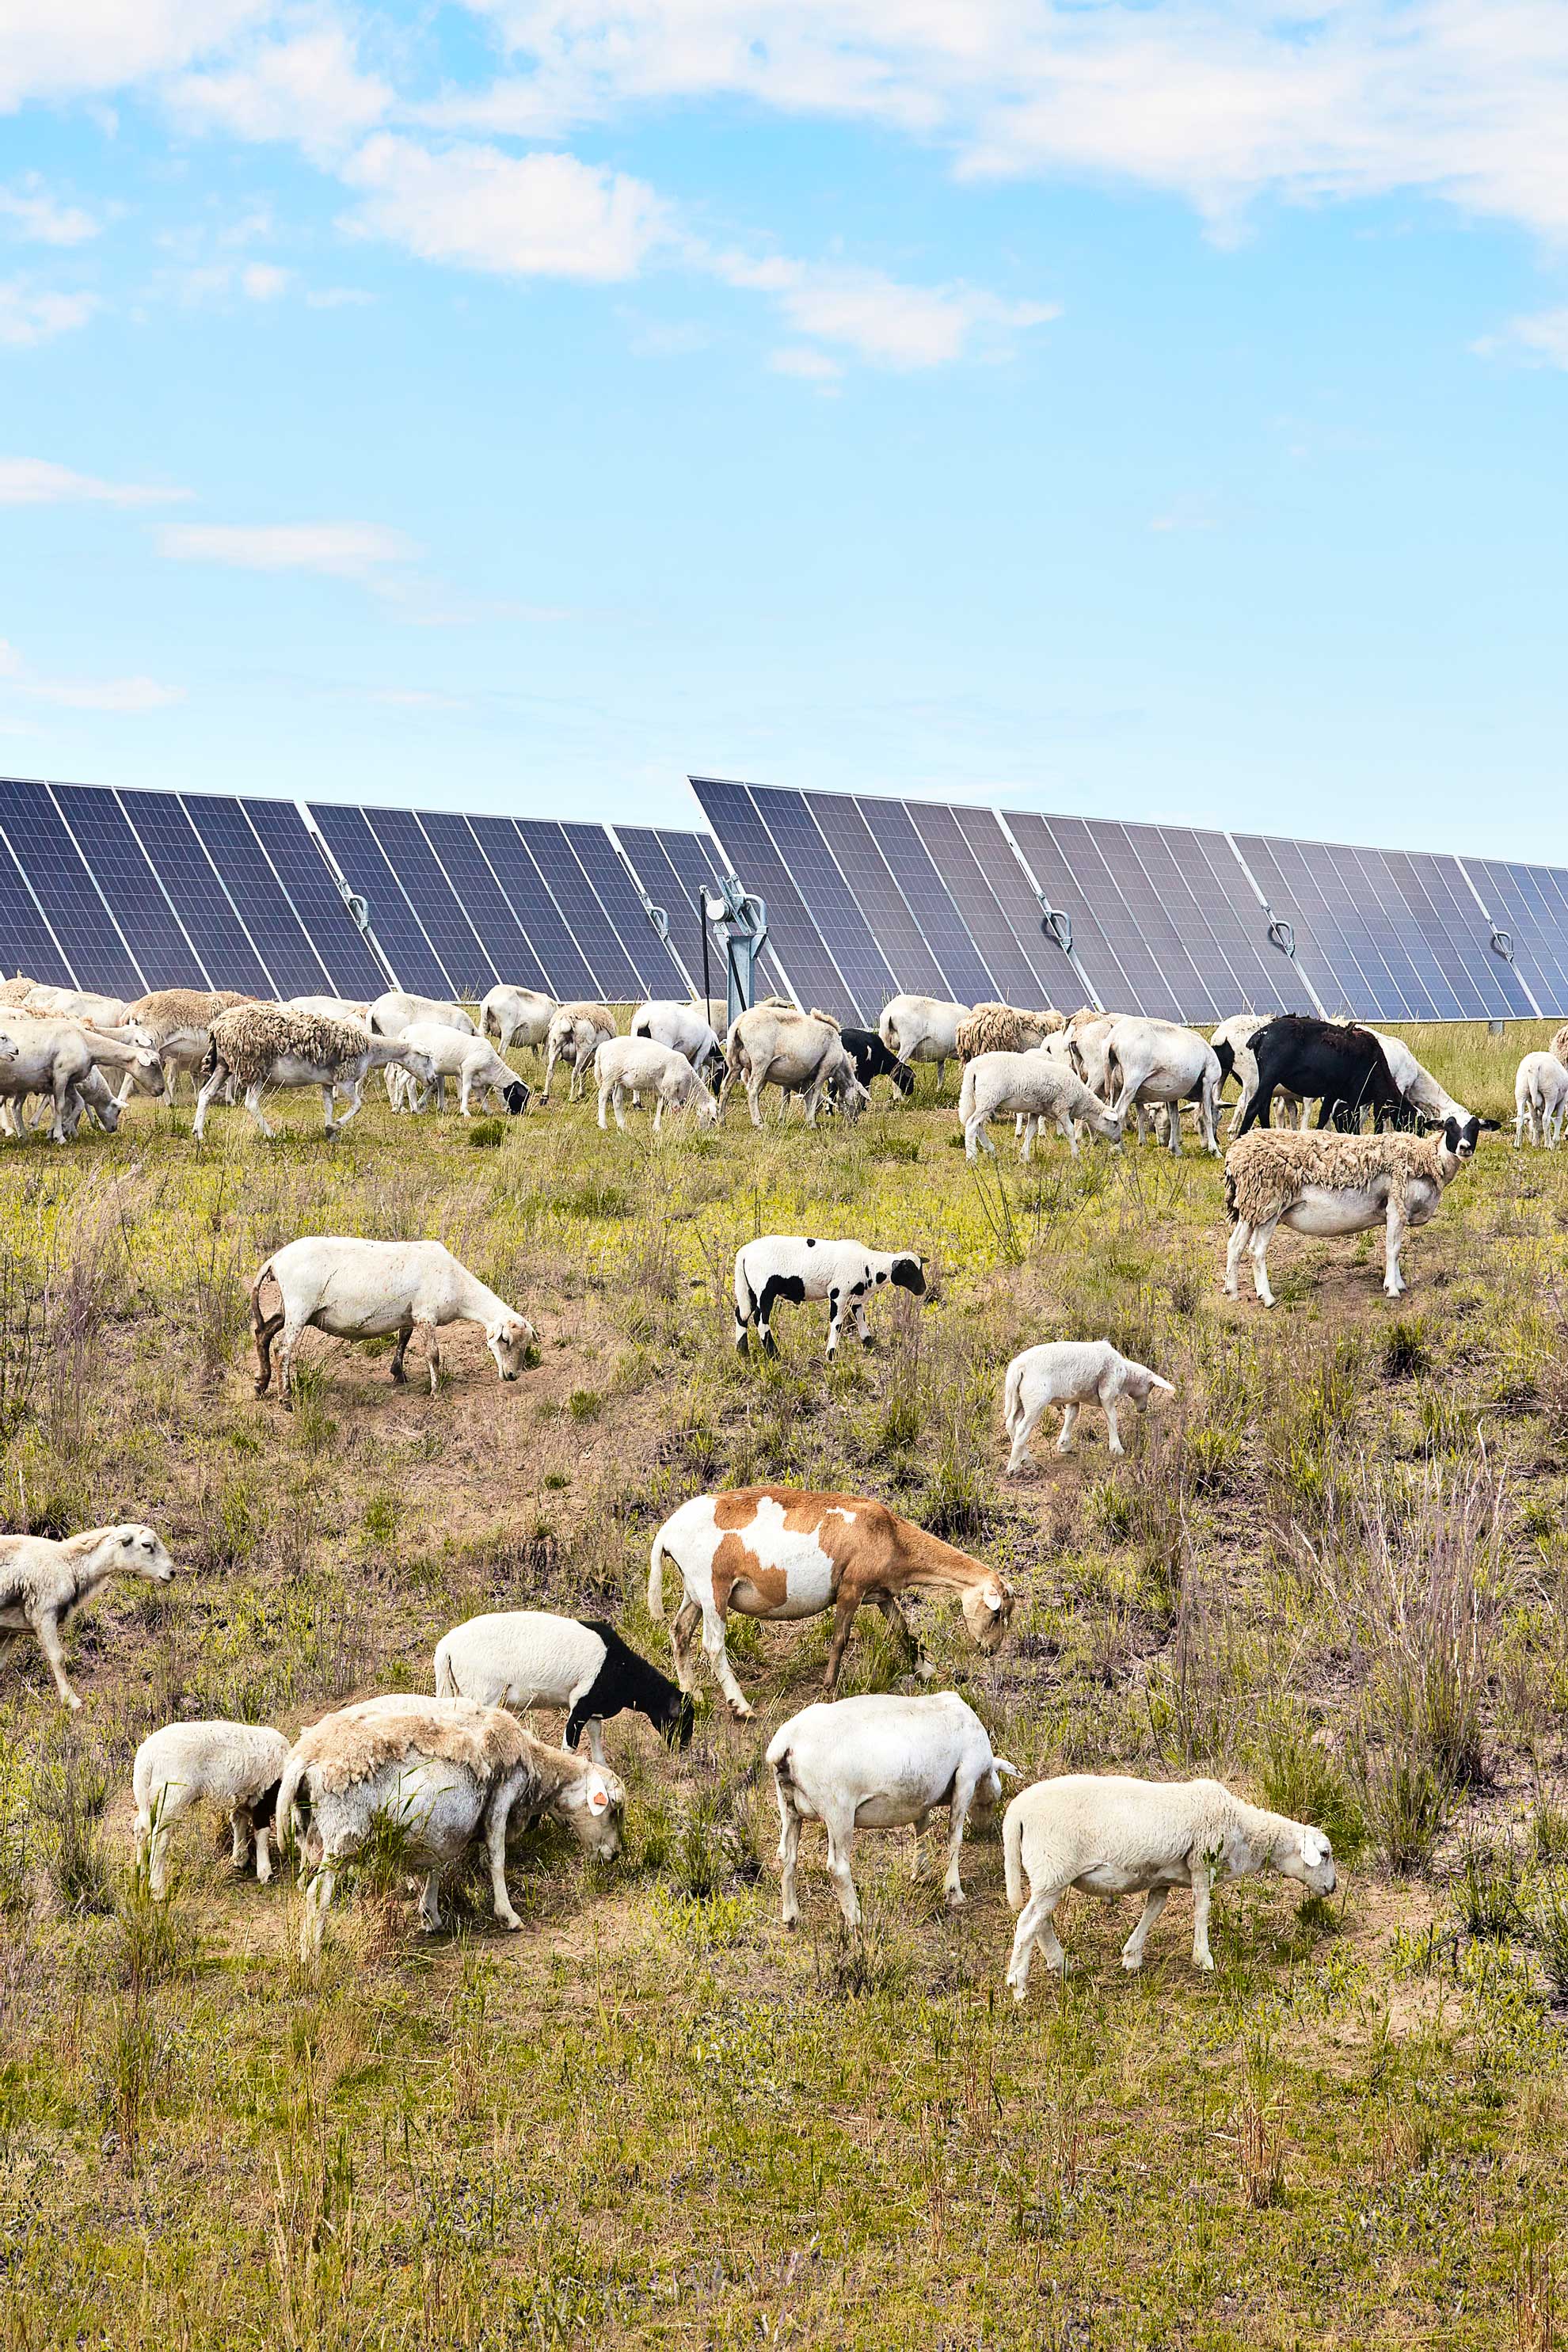 Sheep grazing in front of solar panels at North Star solar farm in Minnesota.